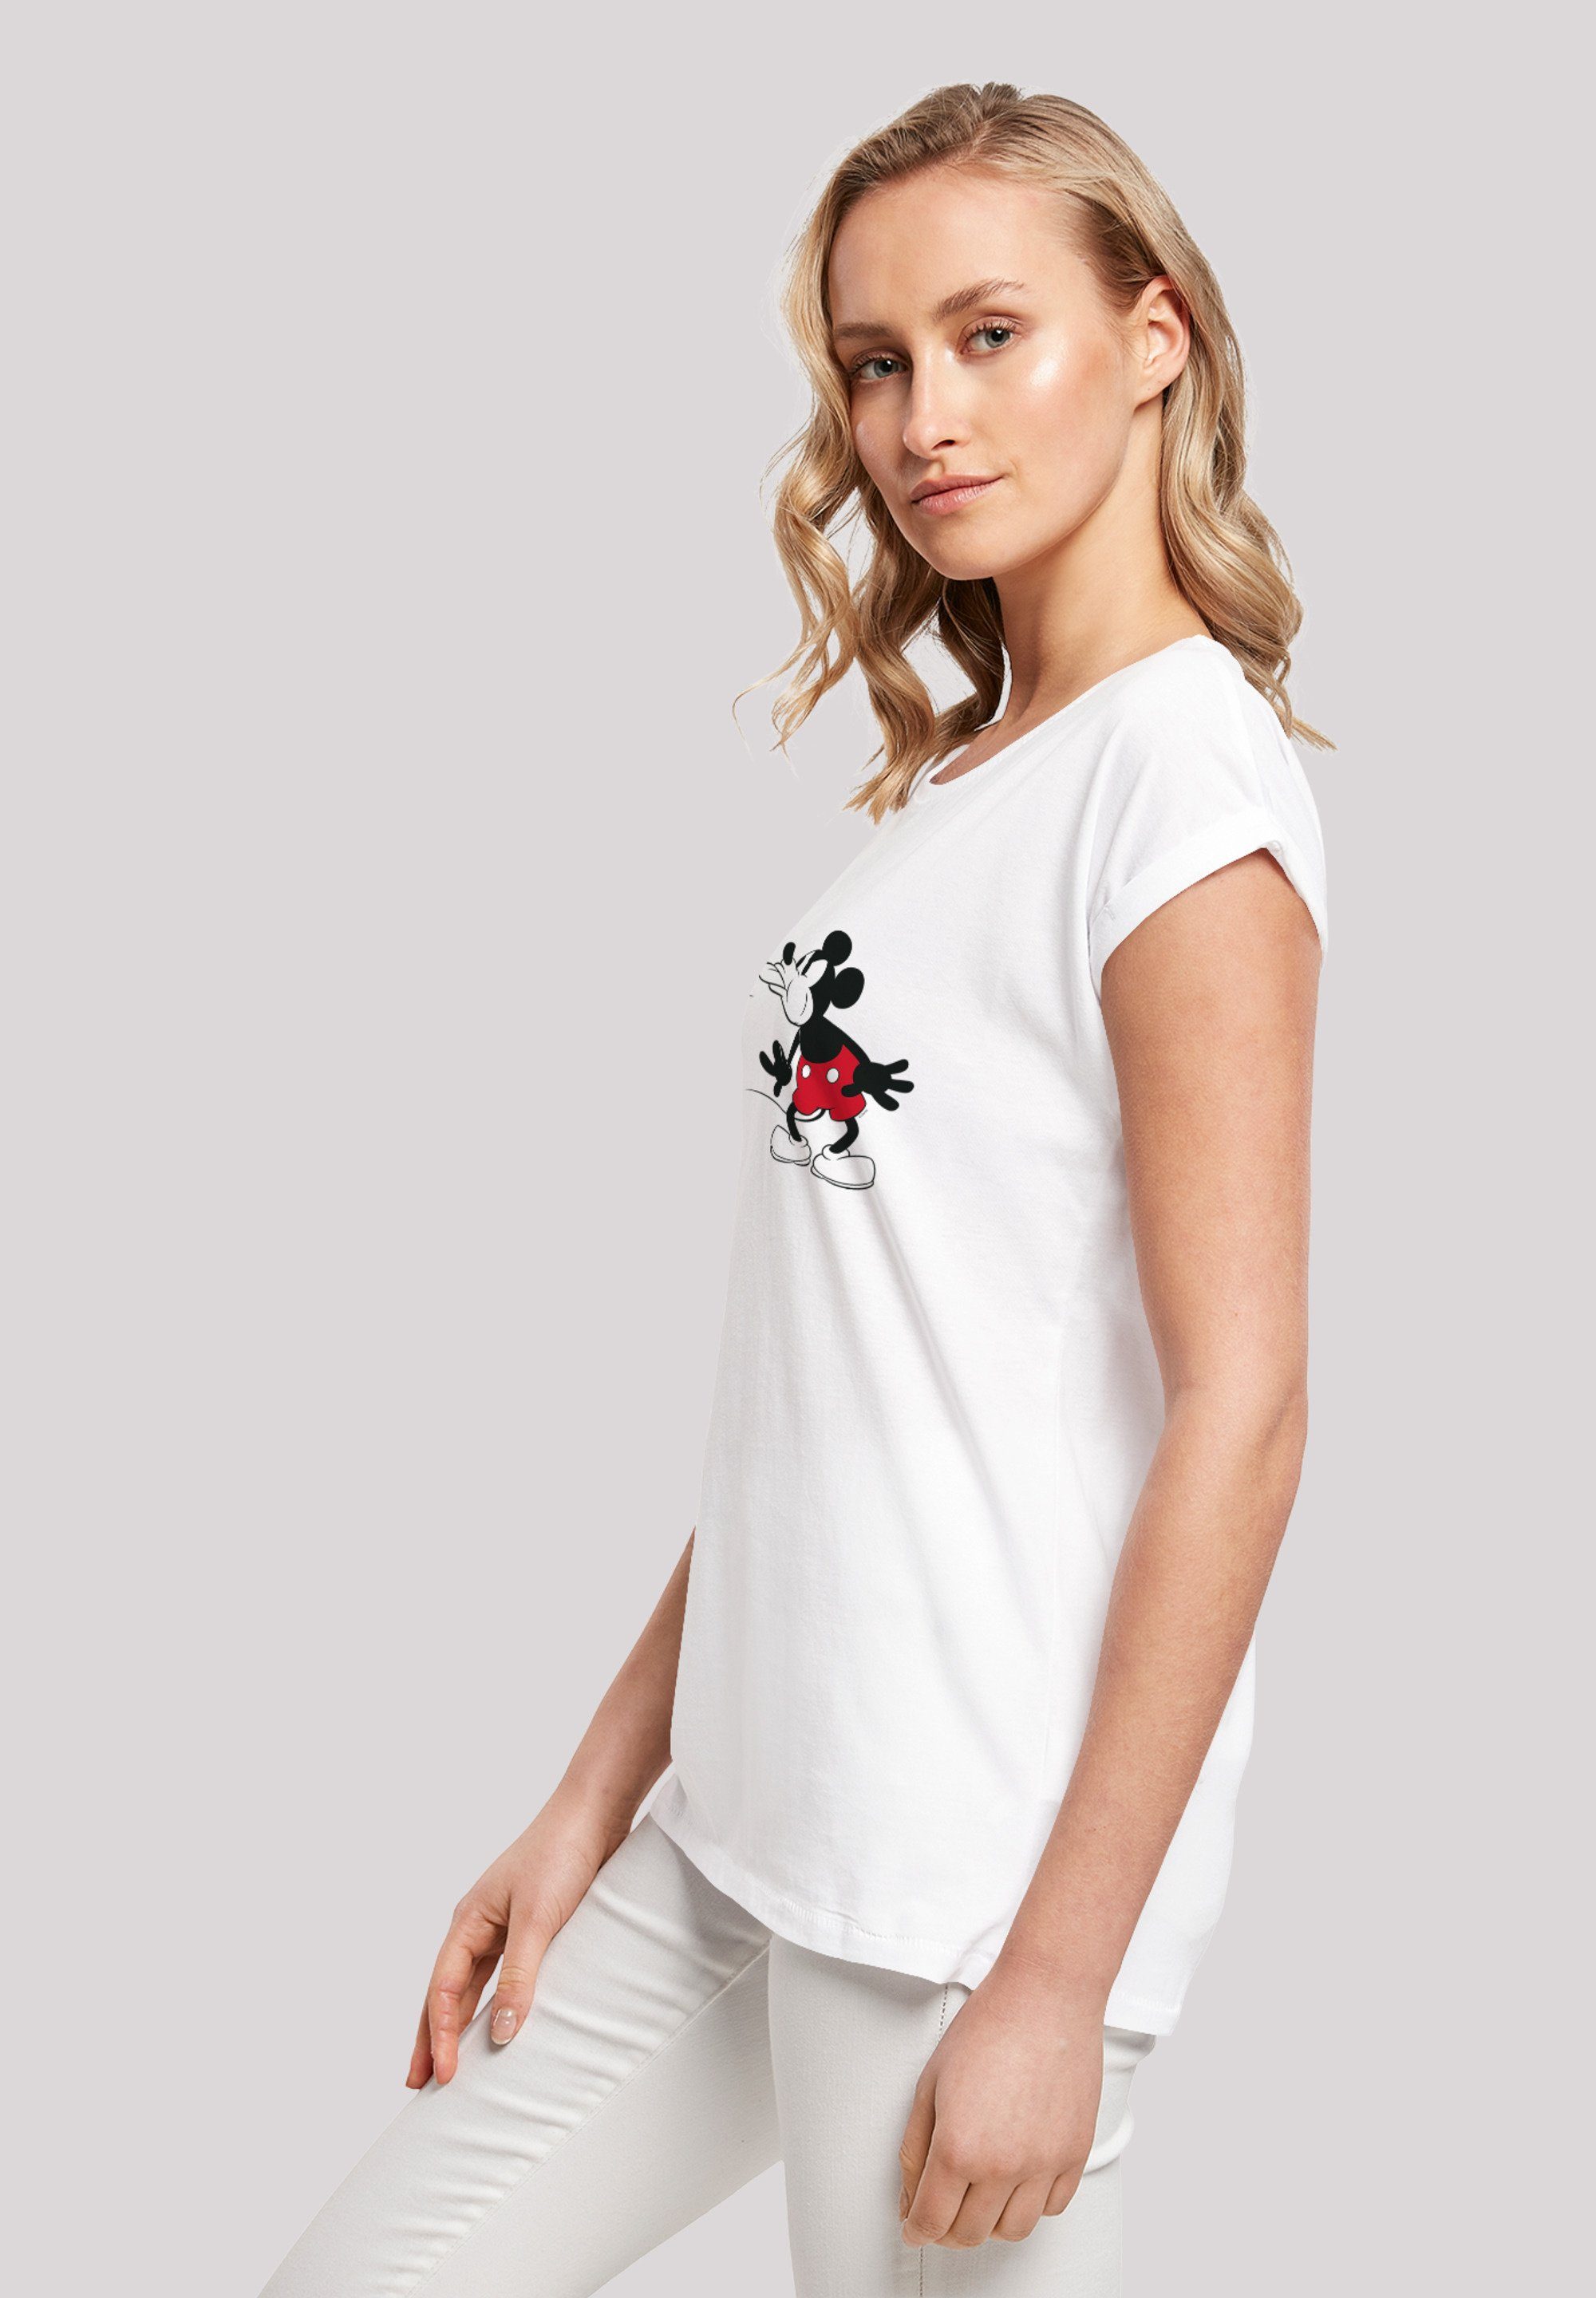 F4NT4STIC T-Shirt Disney Mickey Classic Maus Micky Vintage Mouse Print